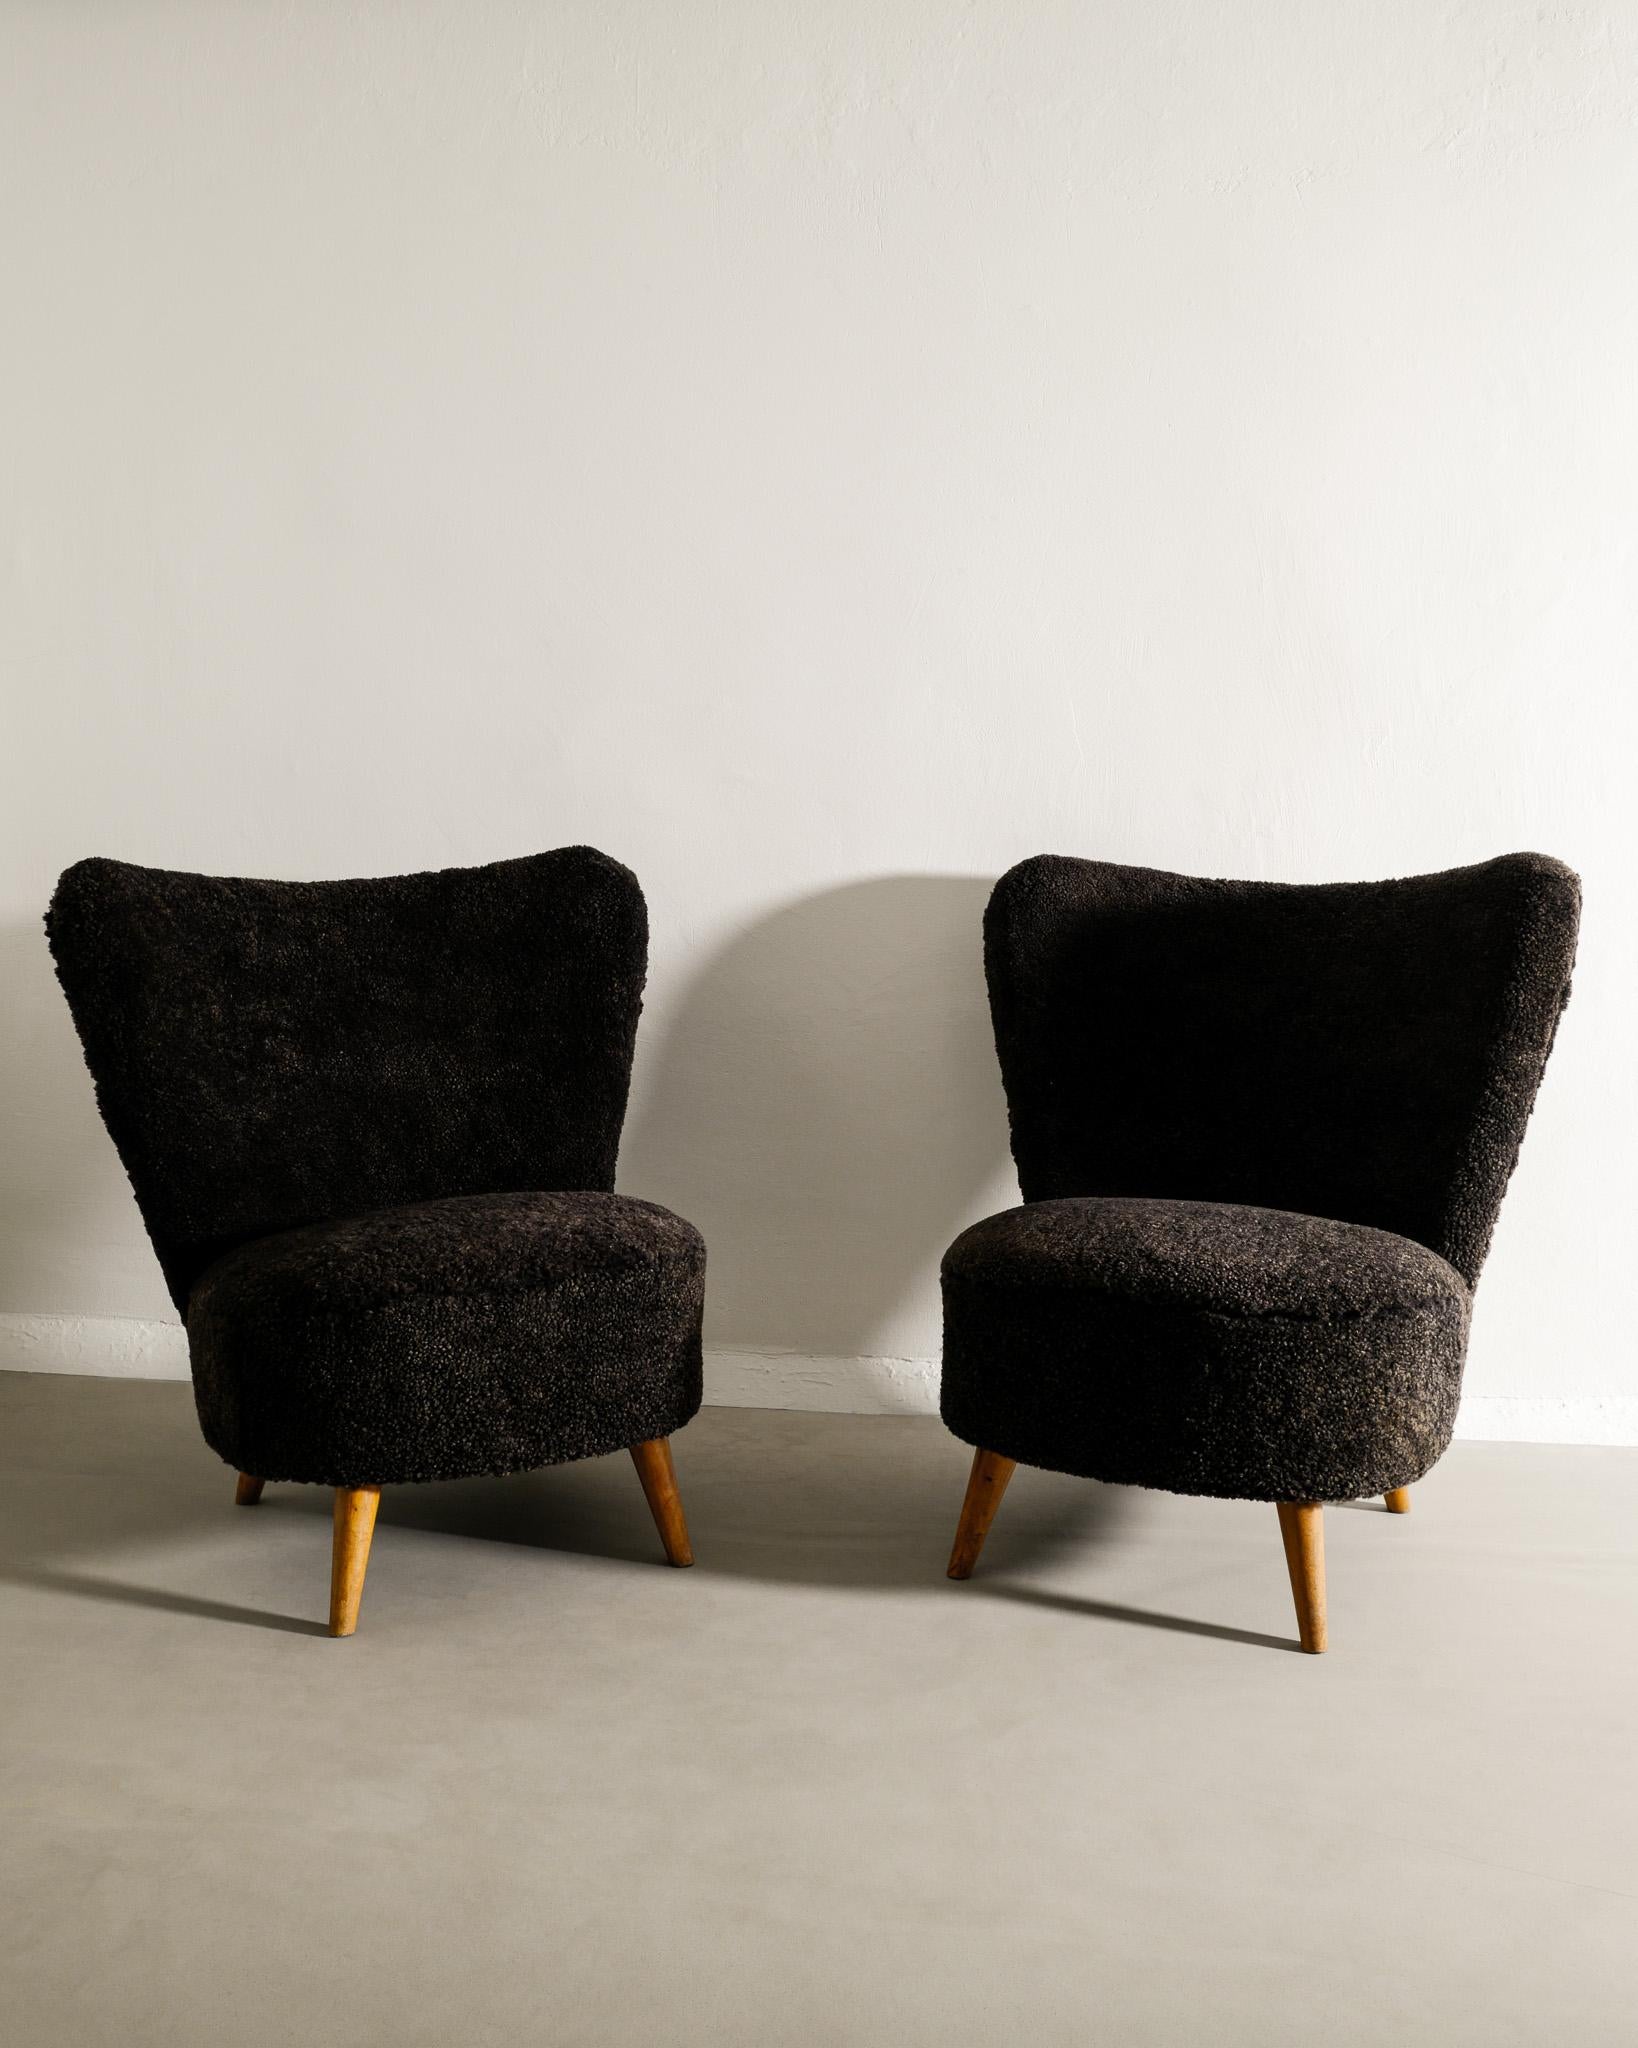 Rare pair of Swedish mid century curved armless arm / easy chairs in beech and newly upholstered dark mocha colored sheepskin. In great matching condition. Produced in Sweden 1940s. 

Dimensions: H: 78 cm / 30.70